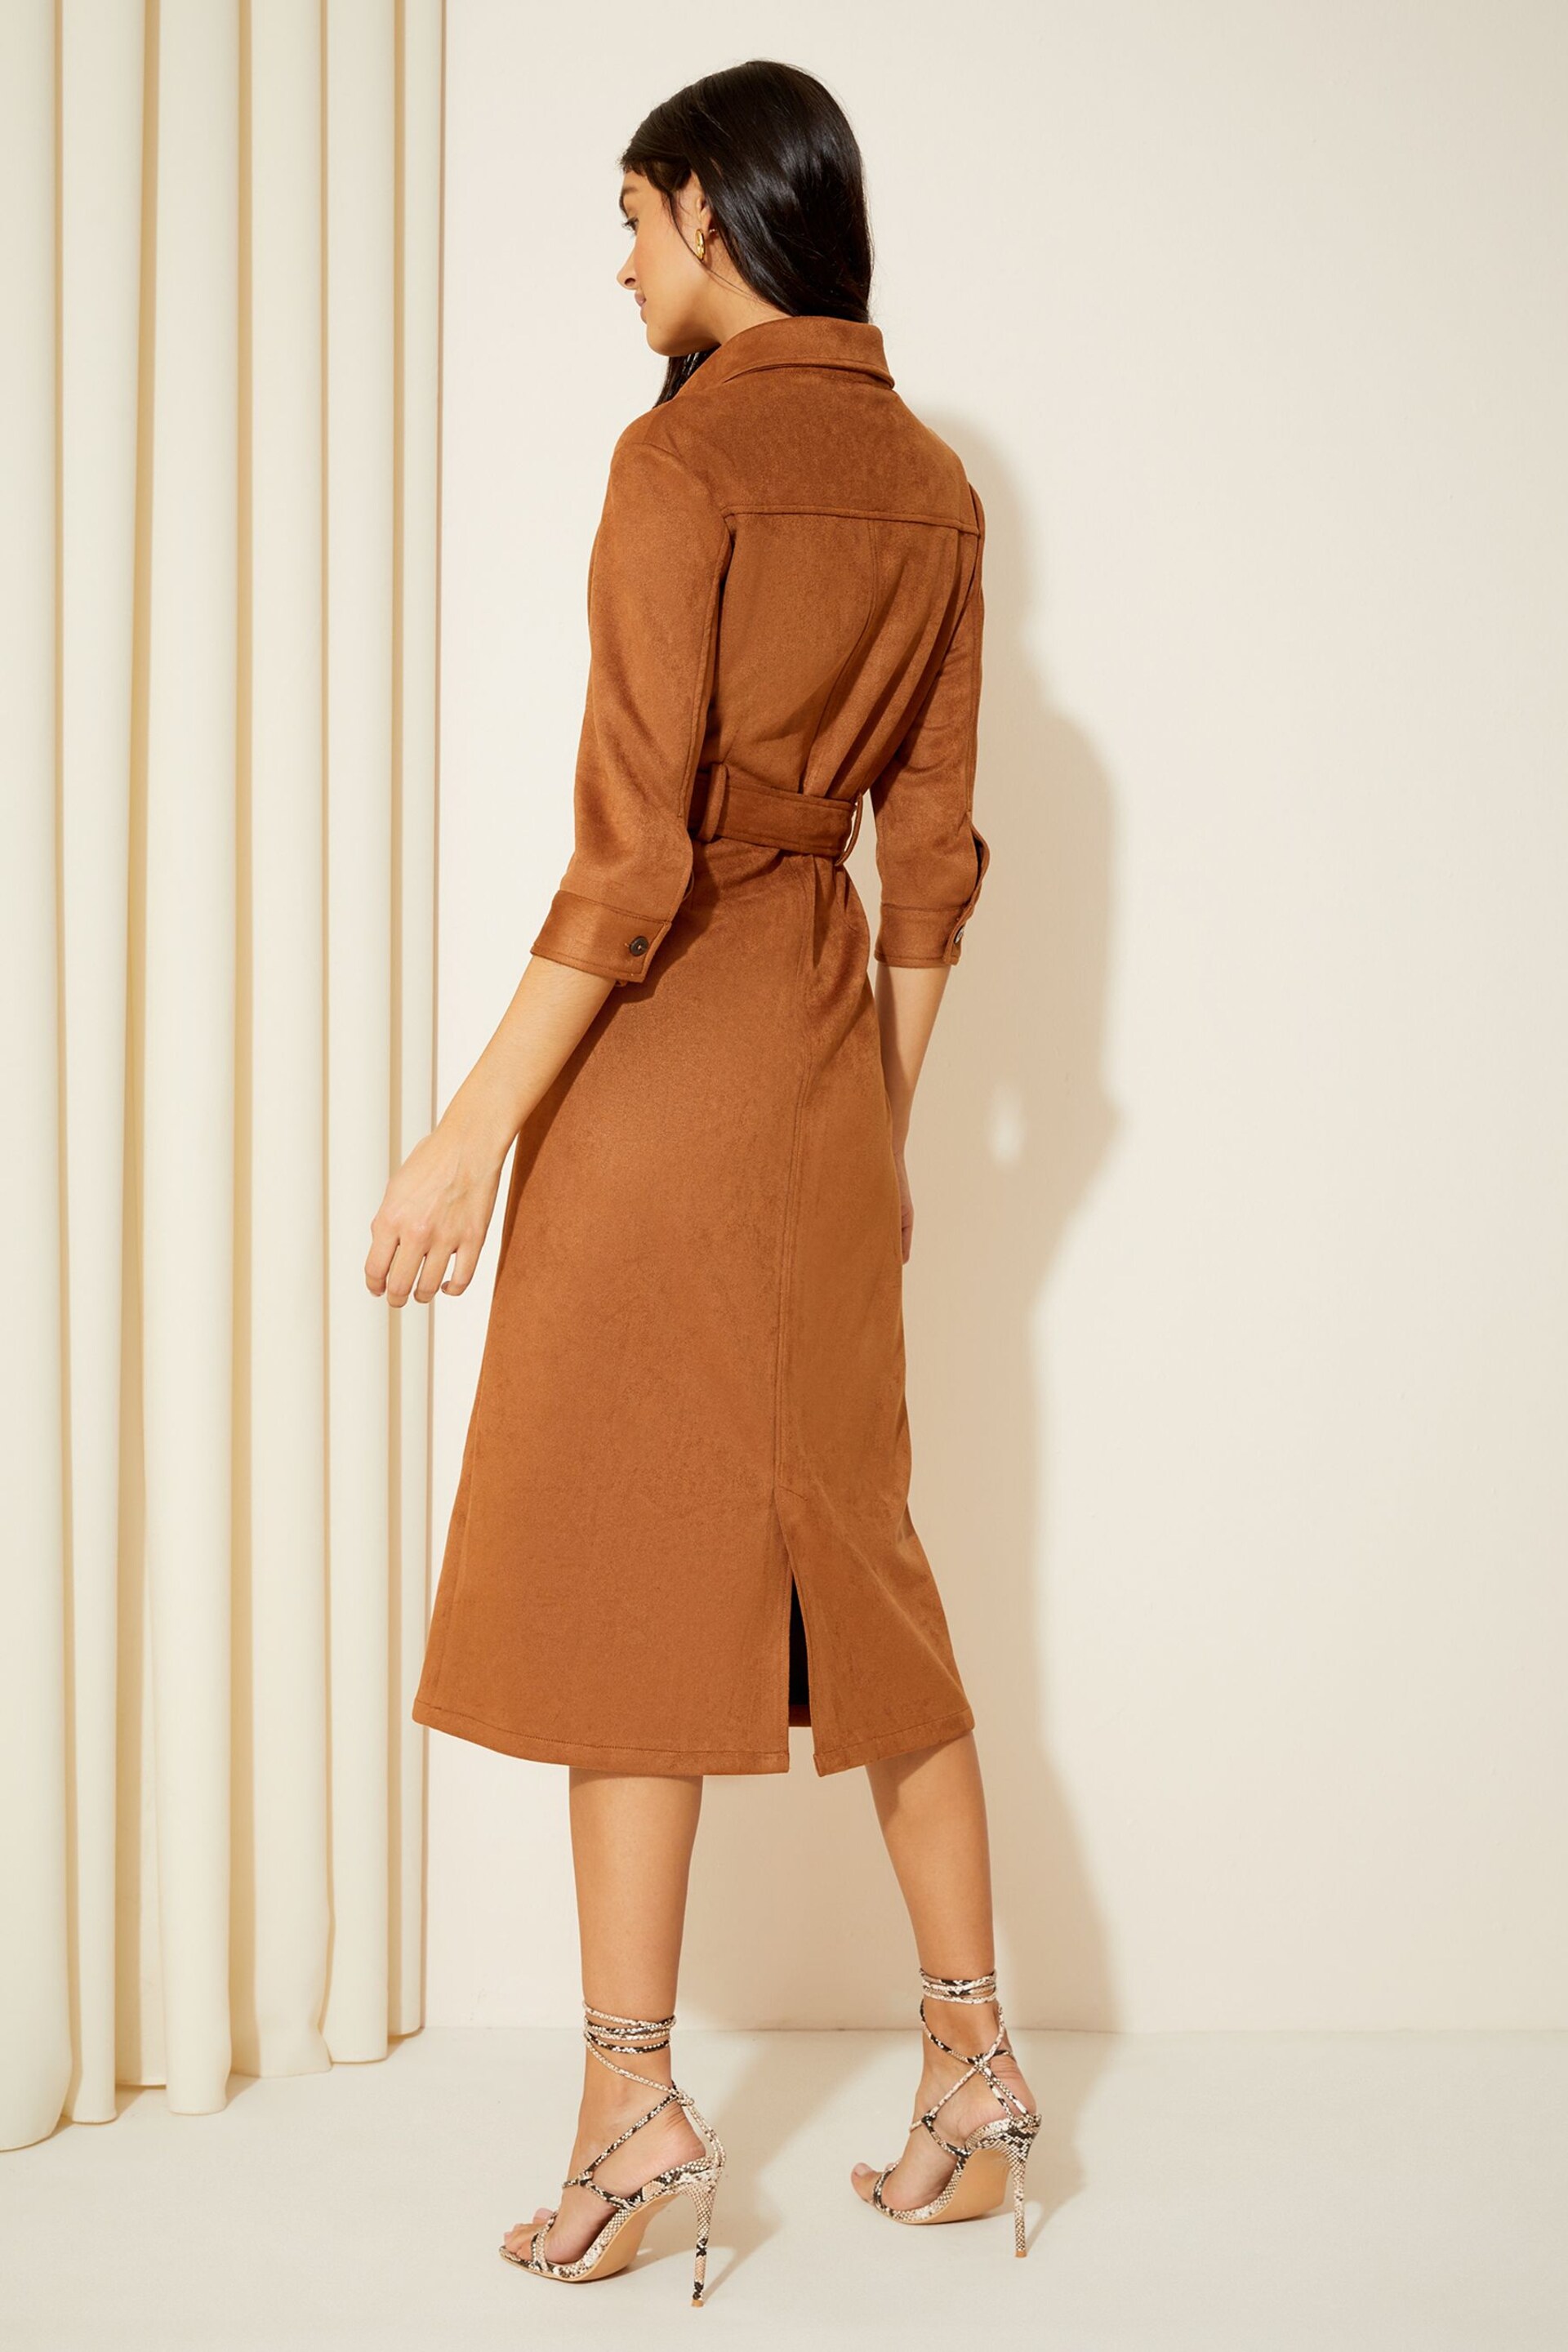 Friends Like These Camel Suedette Maxi Dress - Image 2 of 4